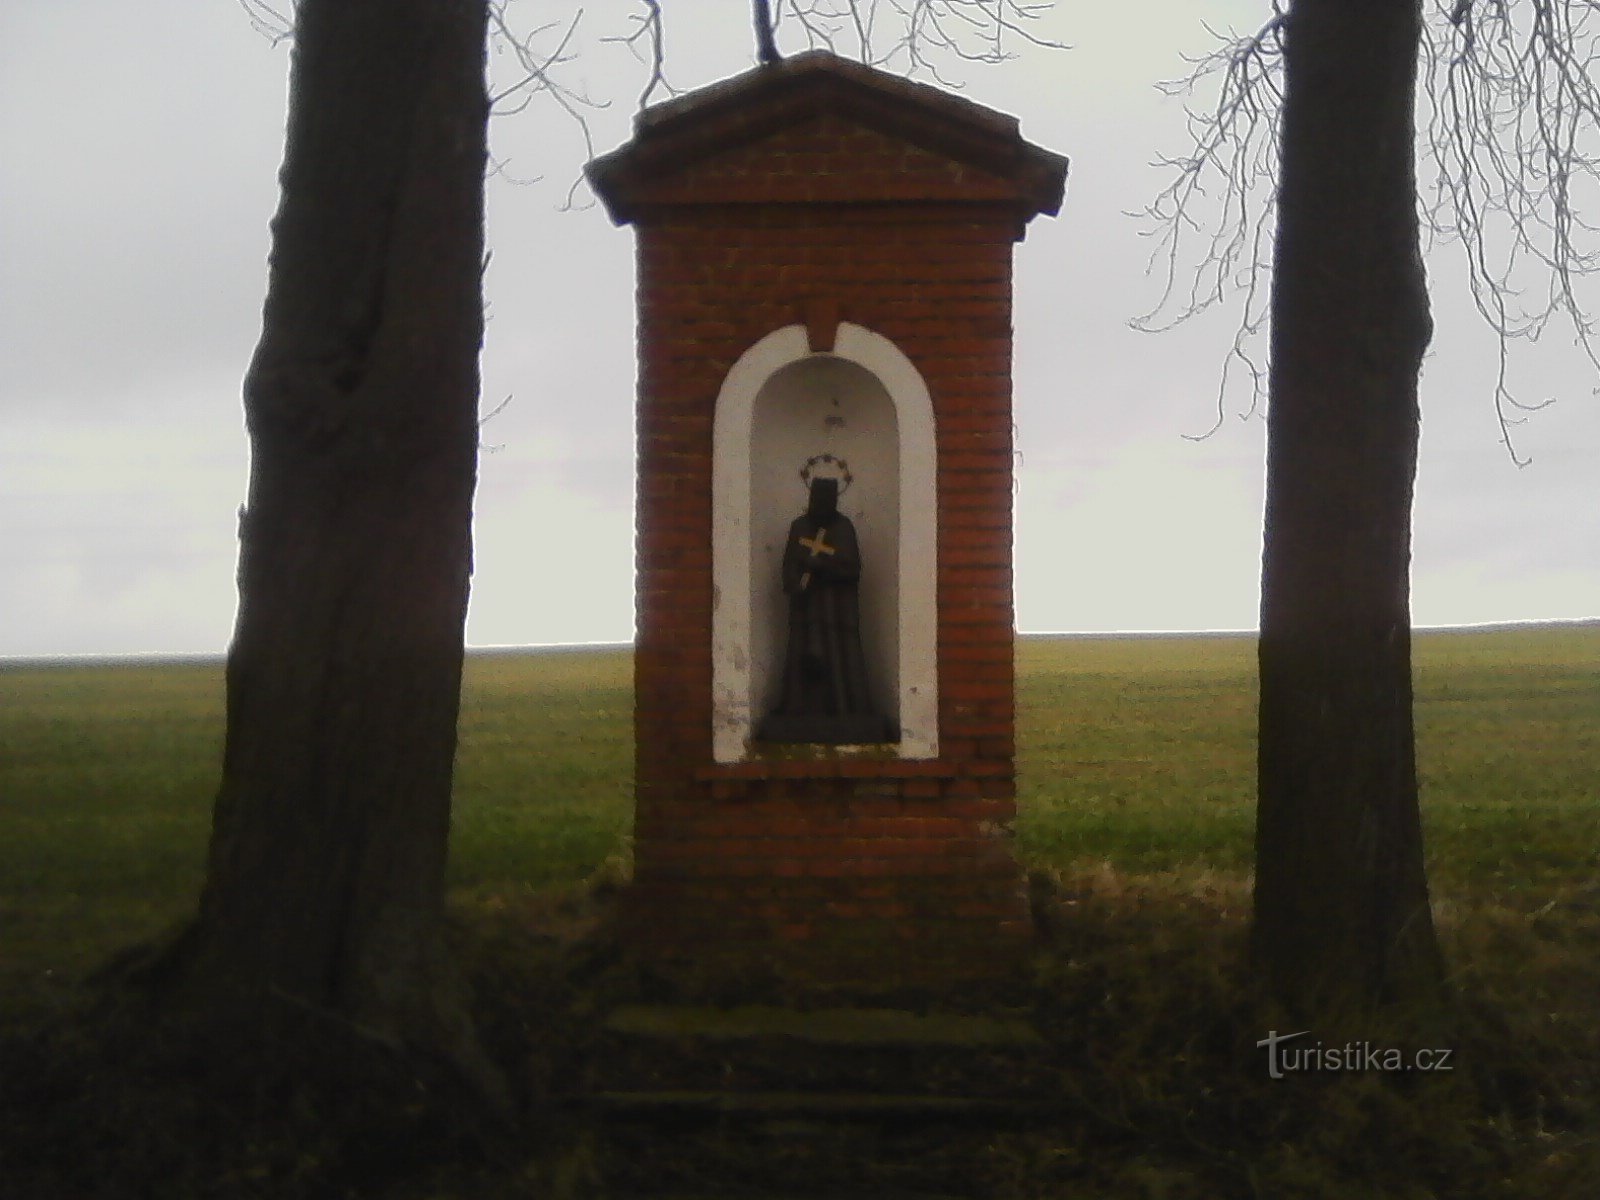 2nd chapel on the way to Bedřichov with a statue of St. John of Nepomuk.